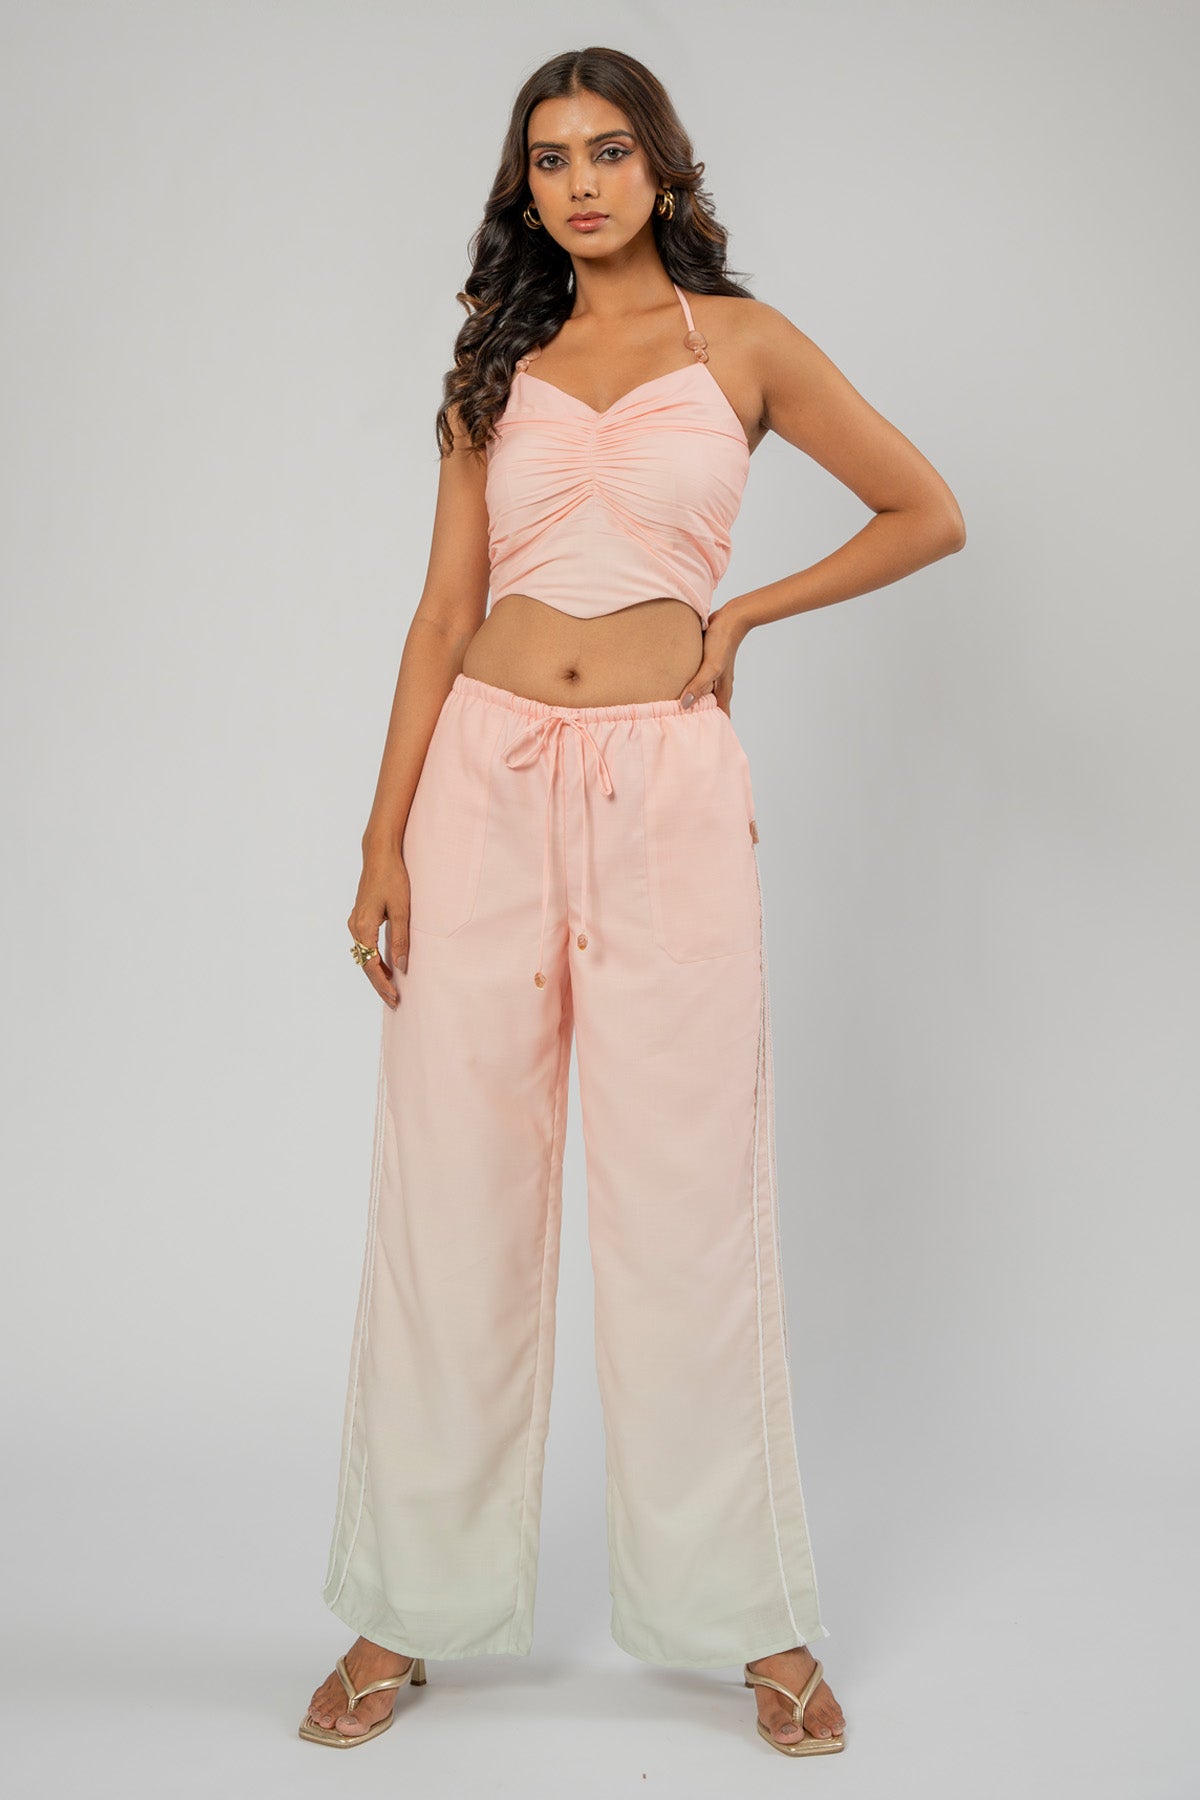 The Decem Ally Pink And Mint Linen Co-ord Set for Women online available at scrollnshops